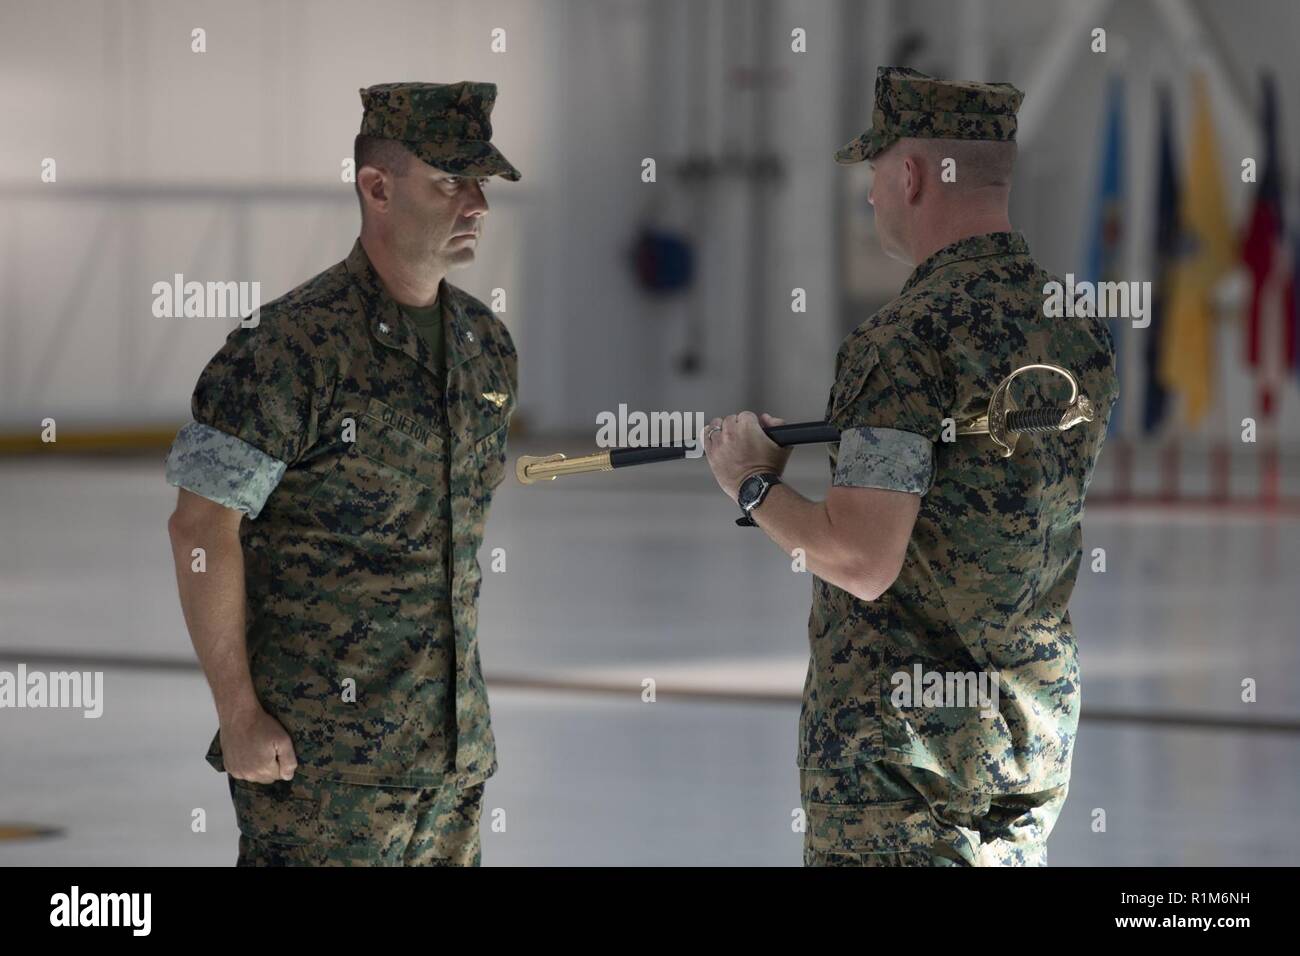 U.S. Marine Corps Lt. Col. Brian Clifton, commanding officer, Marine Medium Tiltrotor Squadron (VMM) 363, prepares to pass on a non-commissioned officer sword during an appointment ceremony for Sgt. Maj. Phillip Anderson, officially welcoming him to the squadron, Oct. 19, 2018. VMM-363, nicknamed the Lucky Red Lions, arrived to Hawaii earlier this year increasing the combat capability and crisis response within the Indo-Pacific region. Stock Photo